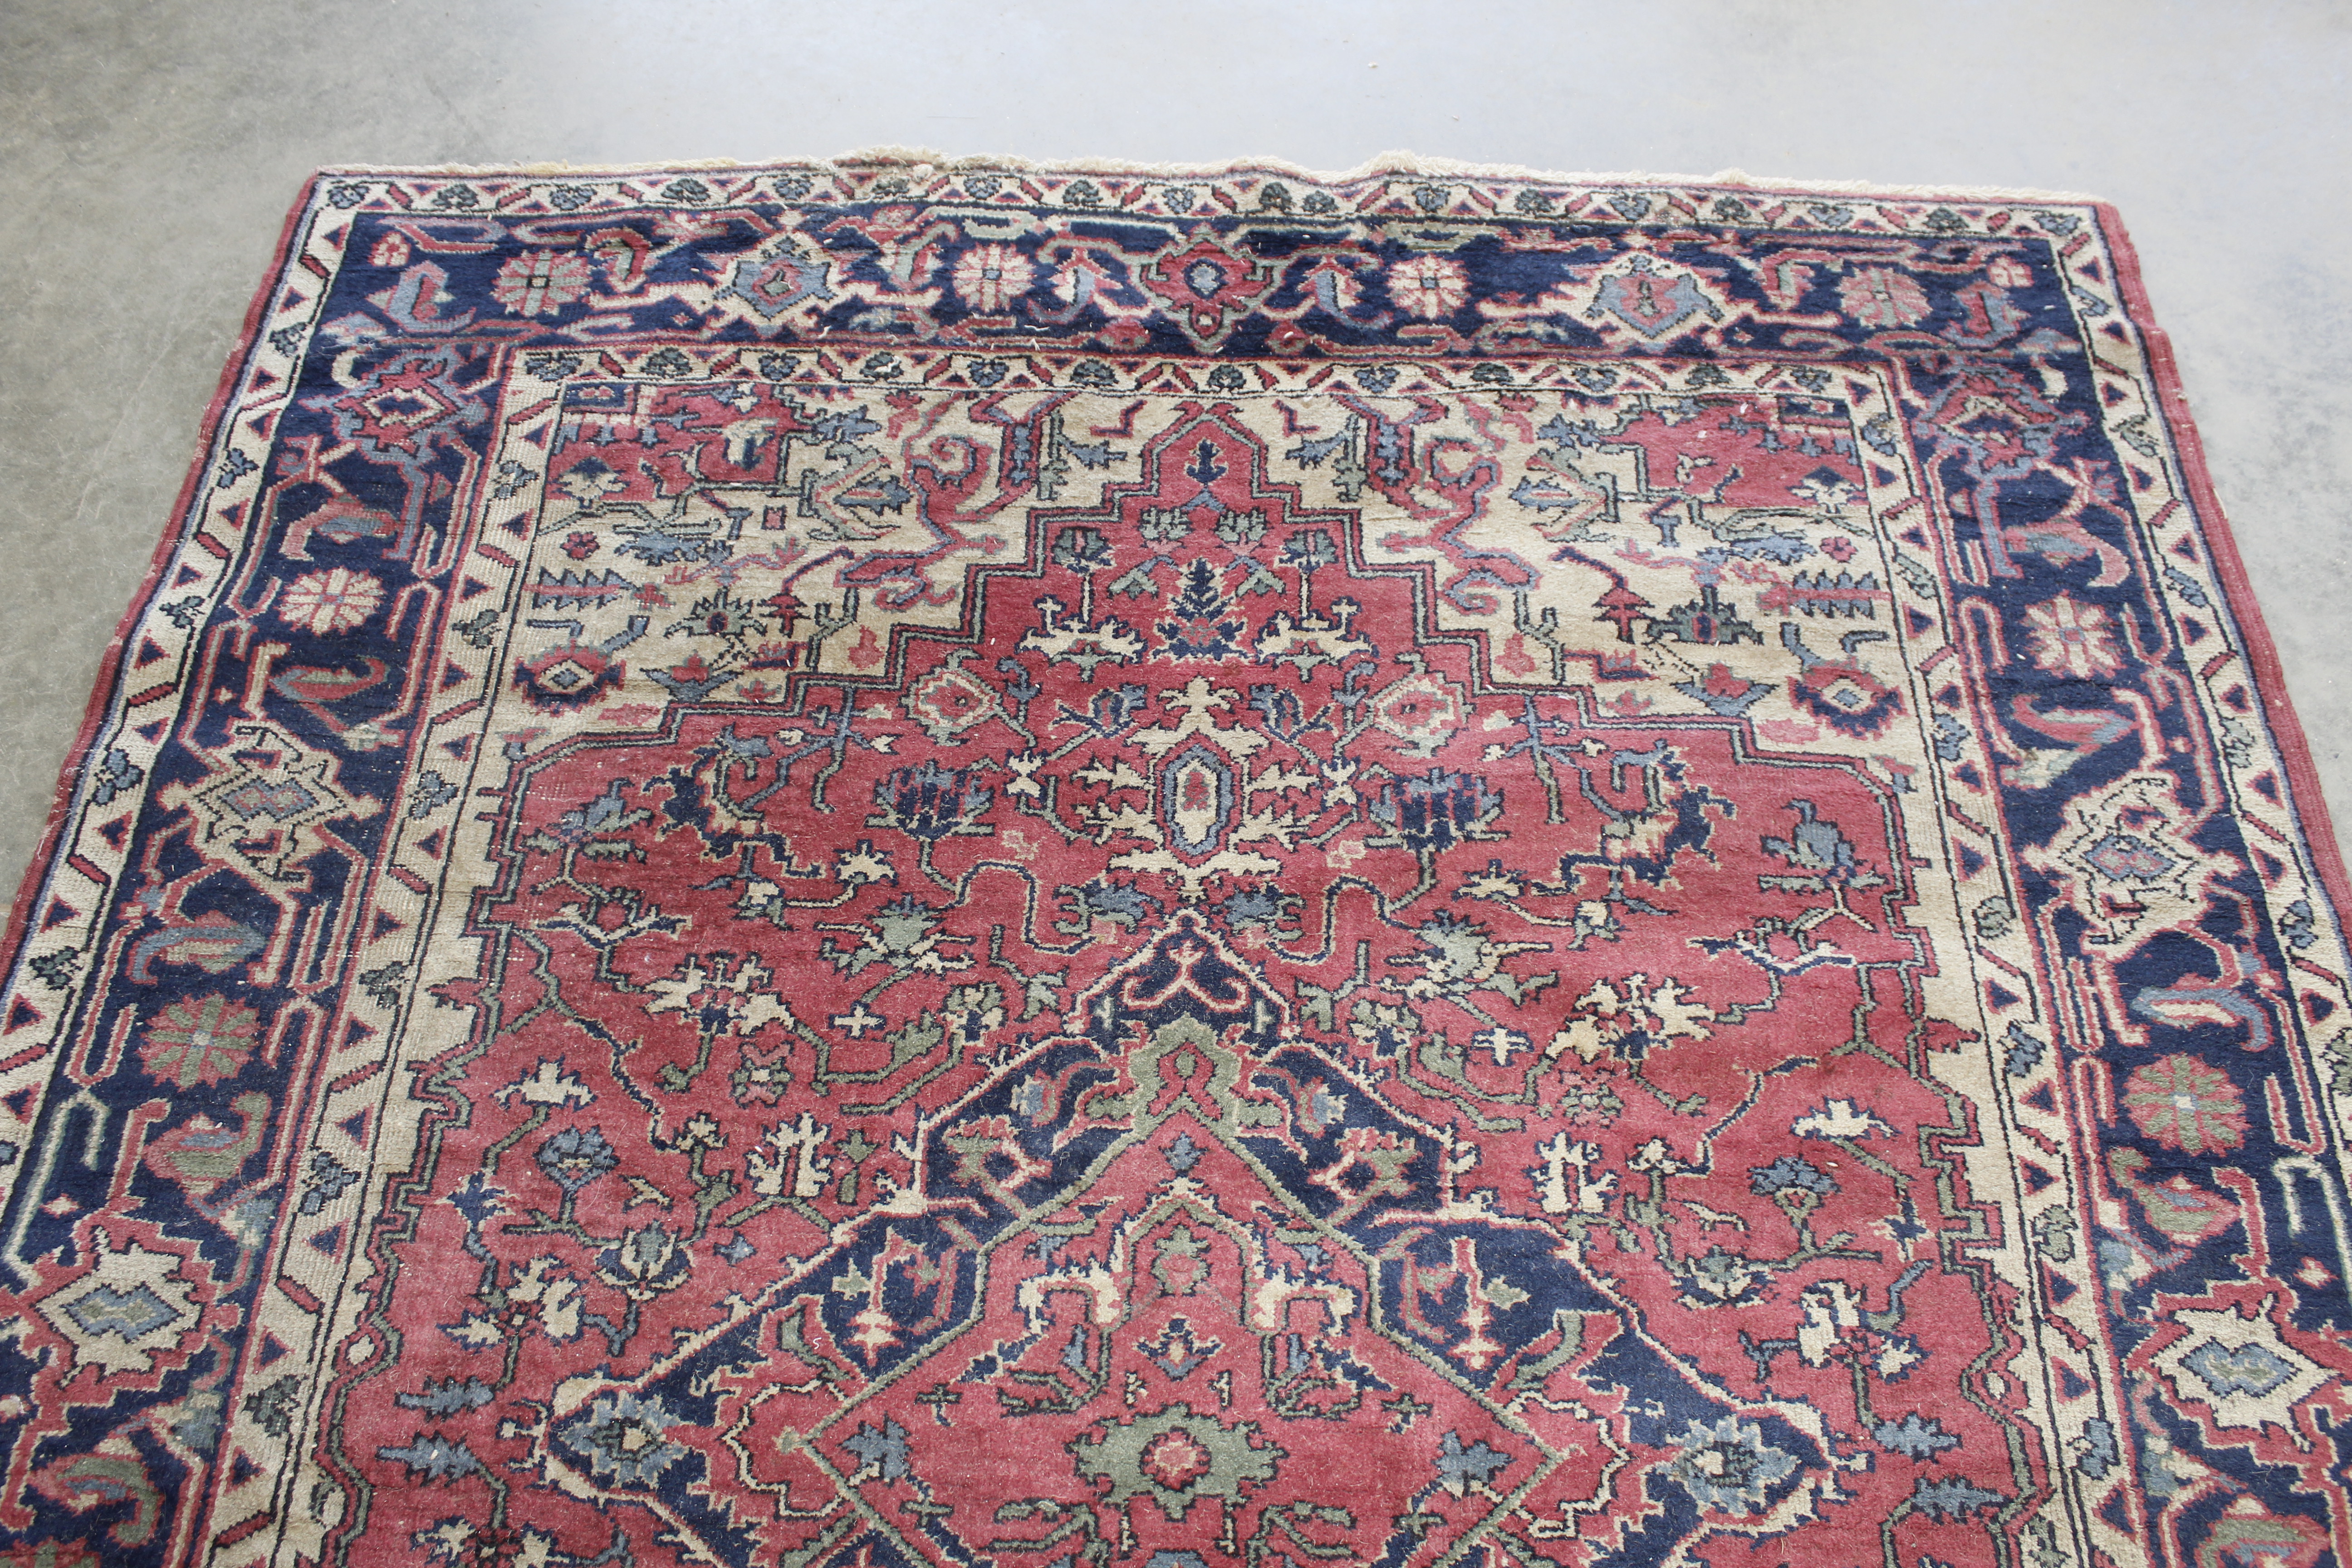 An approx. 9" x 6" blue and red patterned rug - Image 4 of 5